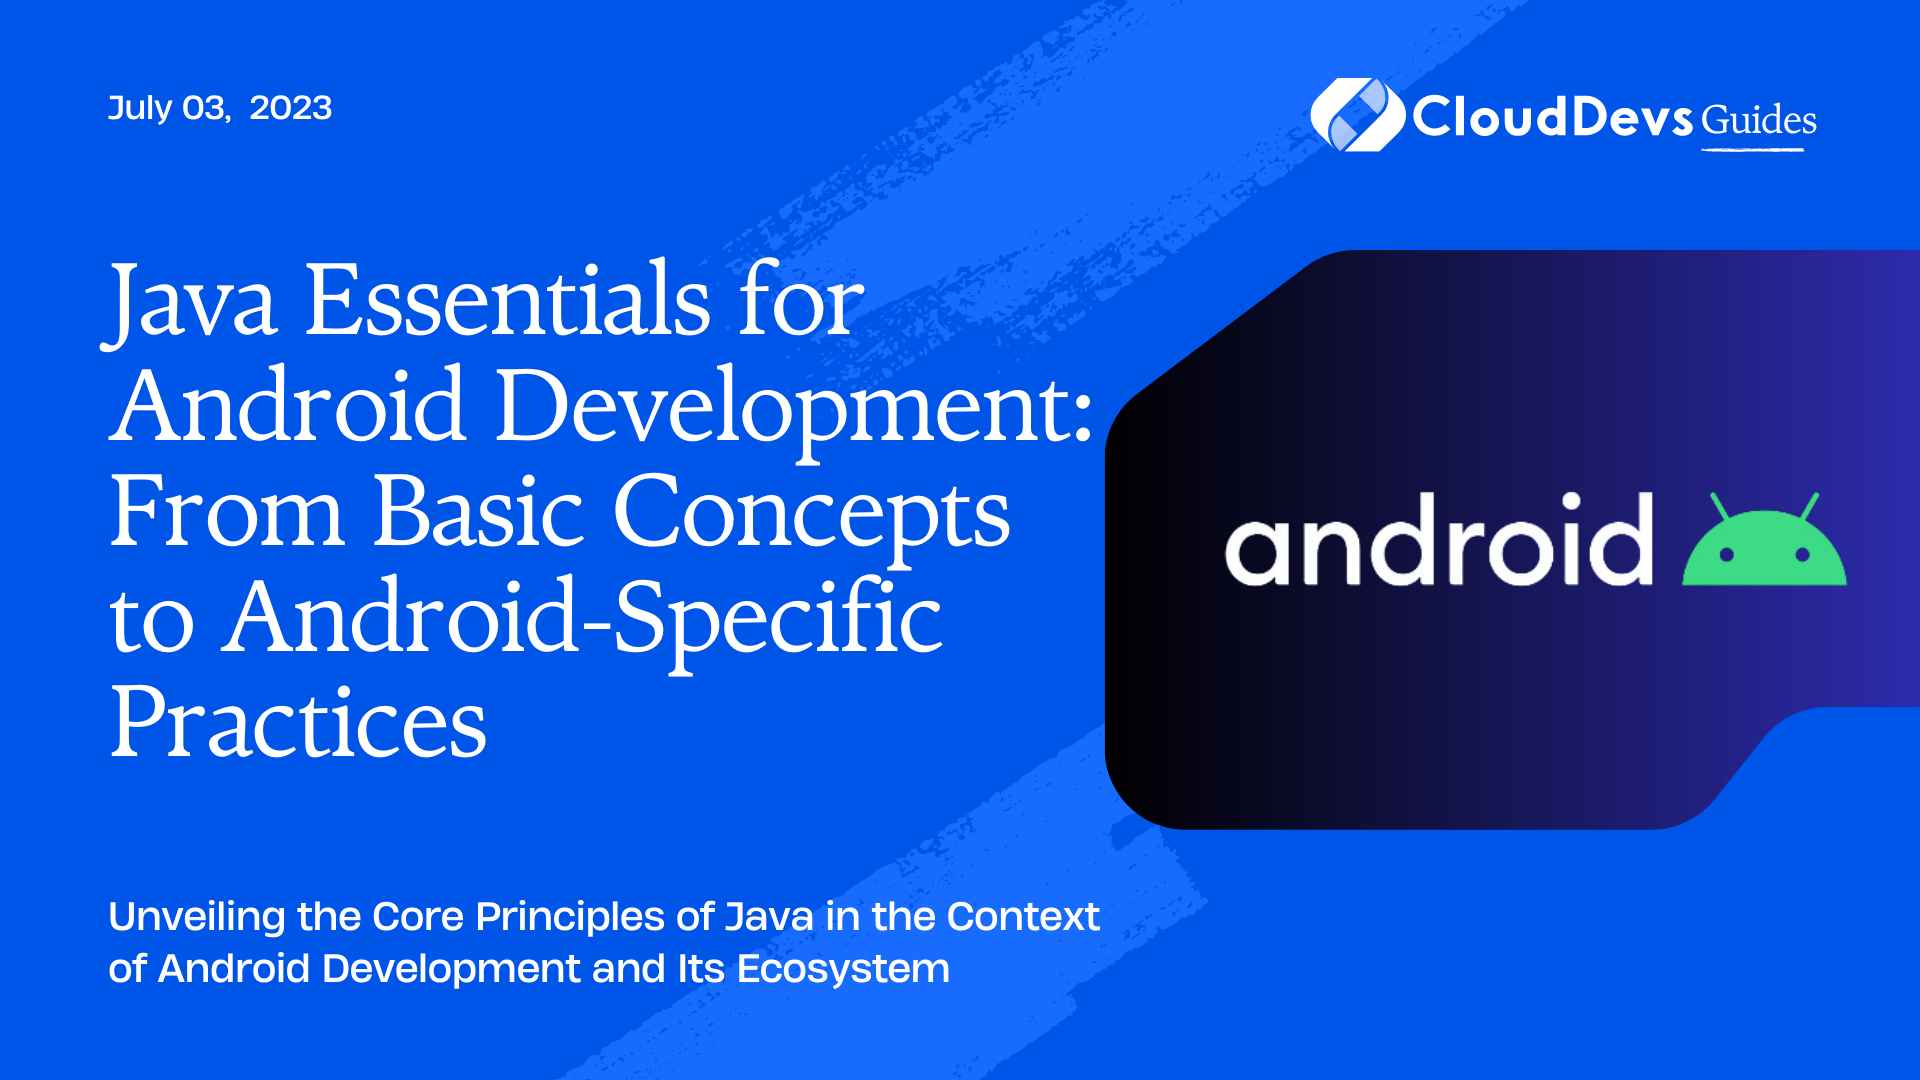 Java Essentials for Android Development: From Basic Concepts to Android-Specific Practices